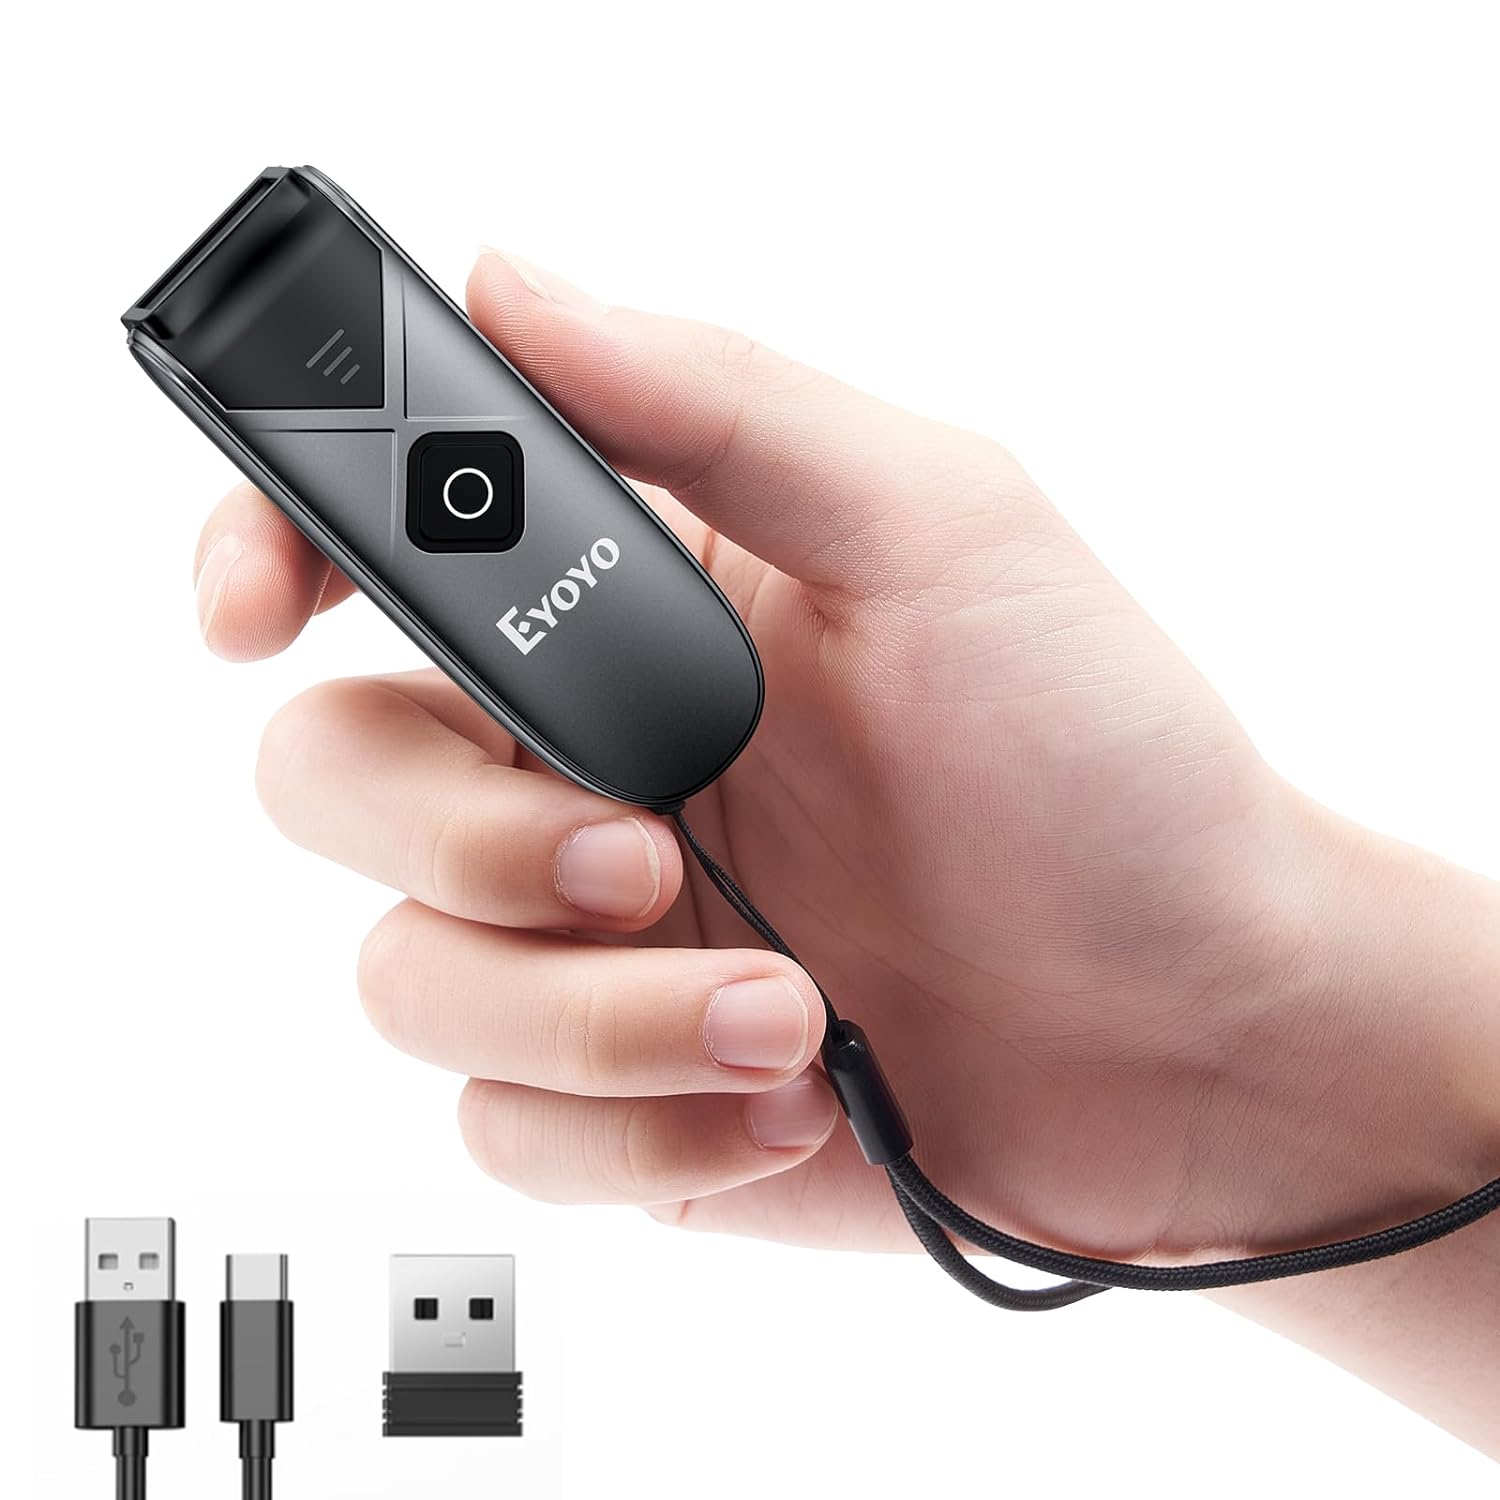 Eyoyo Bluetooth 2D&1D Barcode Scanner, Portable Wireless Mini Barcode Reader with 2.4G Wireless/Bluetooth/USB Wired Connection QR Code Scanner Compatible with Pad, Phone, Android, Tablet PC